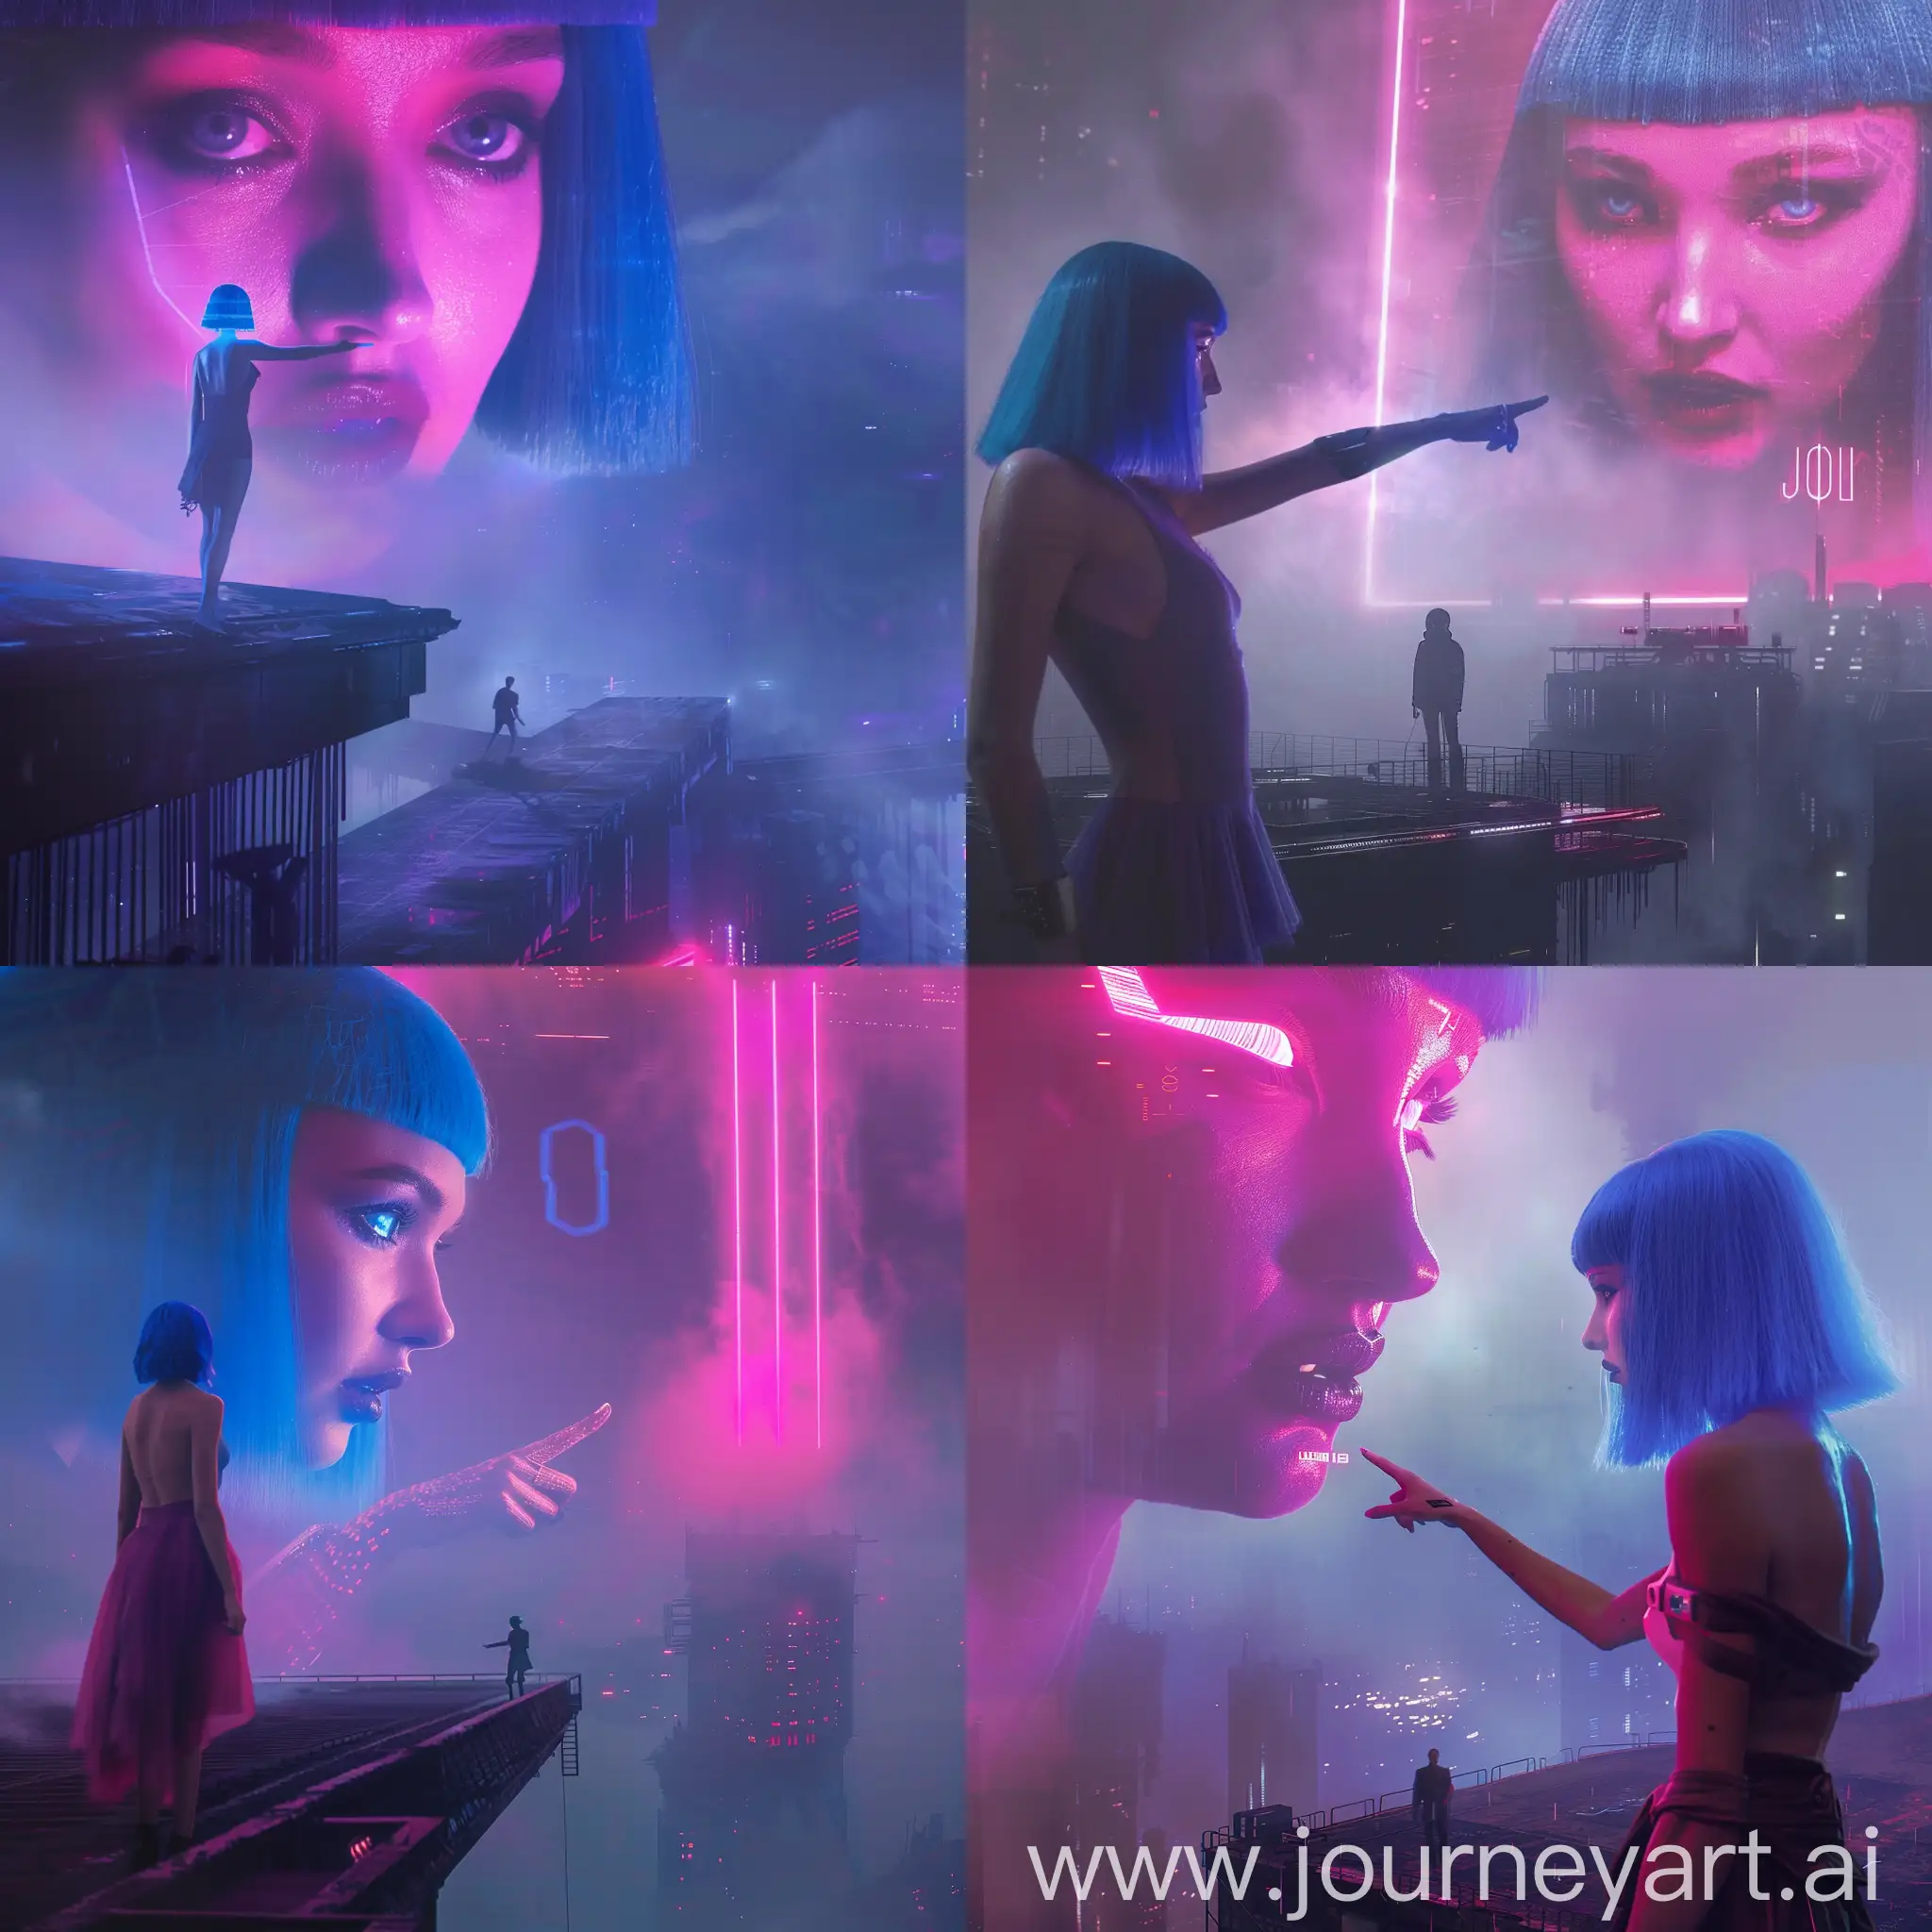 Face Portrait photo of A futuristic, cyberpunk scene from Blade runner 2049 movie you look lonely scene with a giant holographic woman JOI  with blue hair pointing towards a solitary figure on a dark, misty platform. The neon lights and vibrant purples create an ethereal, surreal atmosphere. The background features a foggy, industrial cityscape, adding depth and mystery to the image. The hologram's detailed expression contrasts with the small, silhouetted figure, emphasizing scale and loneliness --cref https://i.postimg.cc/XYHL4NXk/d0da44db45e761a070253b5dccd1a012.jpg --cw 100 --ar 57:128 --v 6